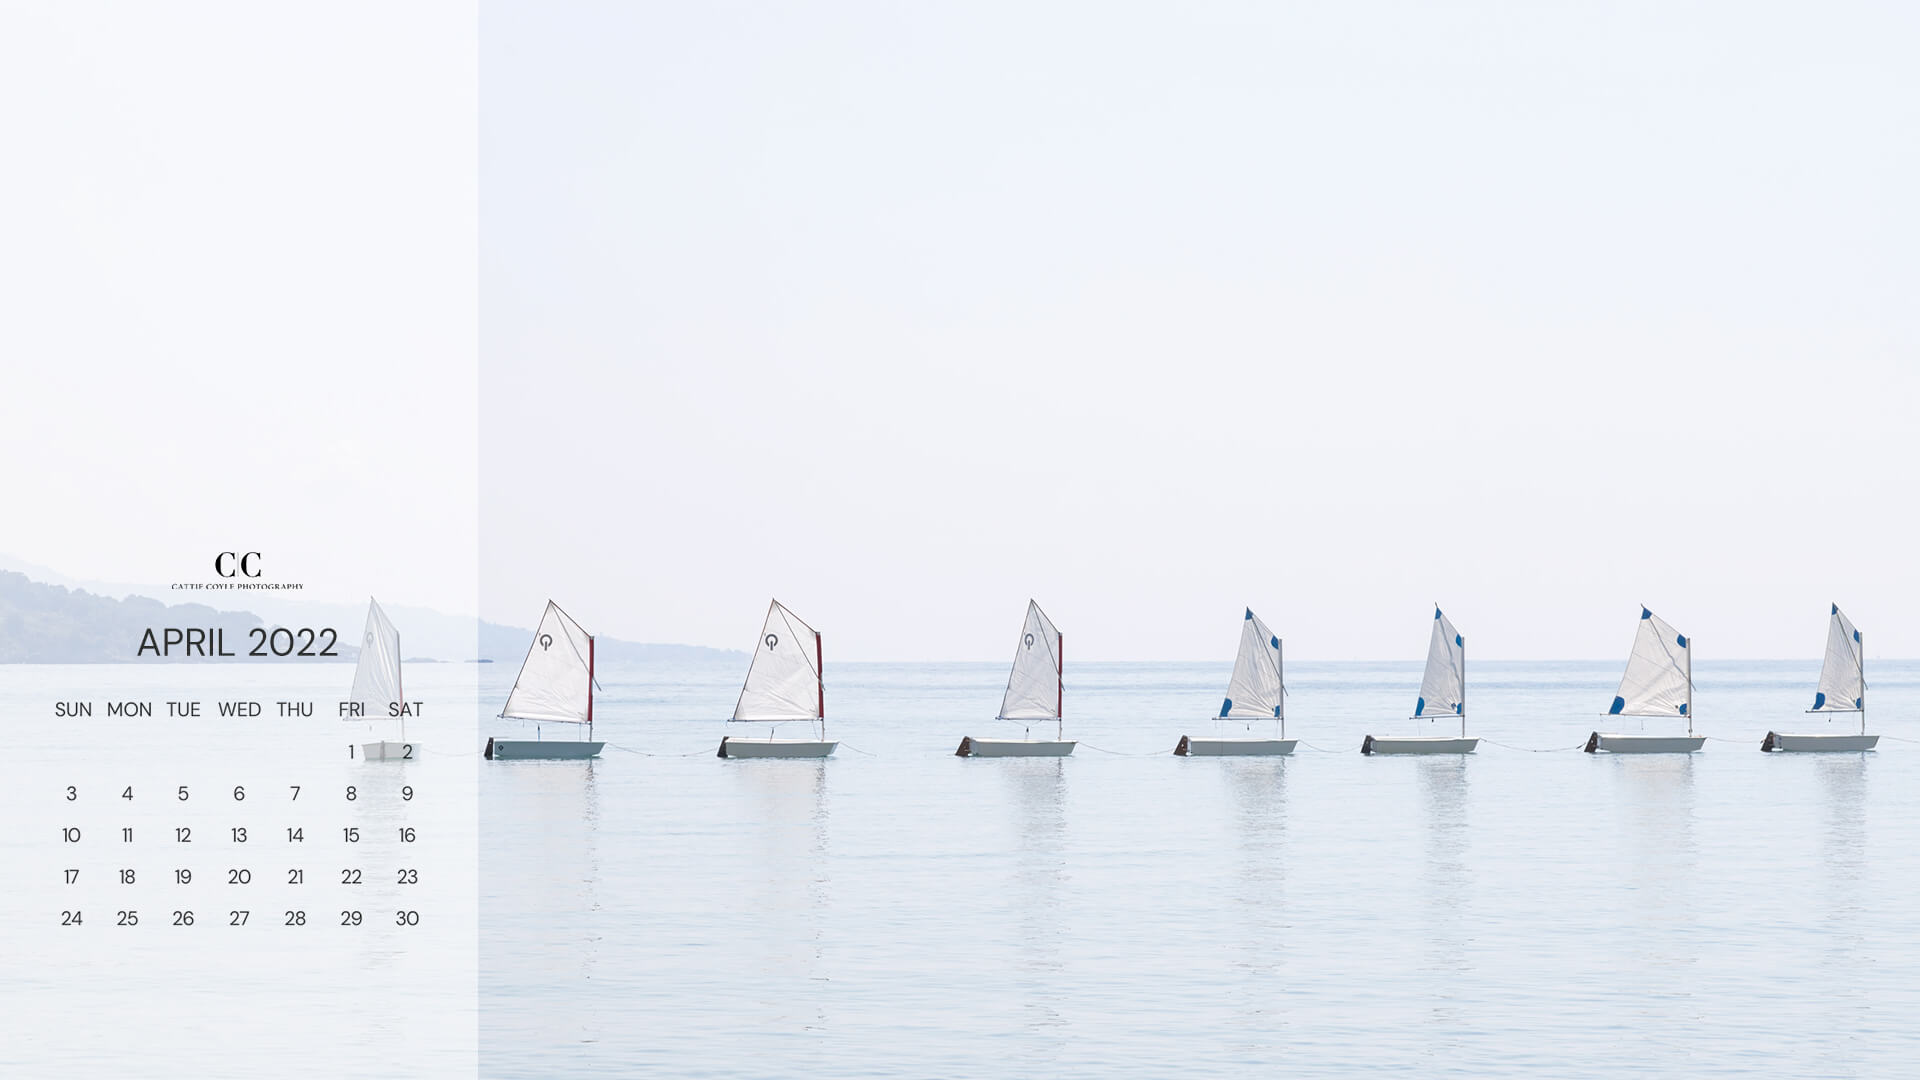 Free Phone & Desktop wallpapers The Little Sailboats No 3 by Cattie Coyle Photography Desktop Screensaver